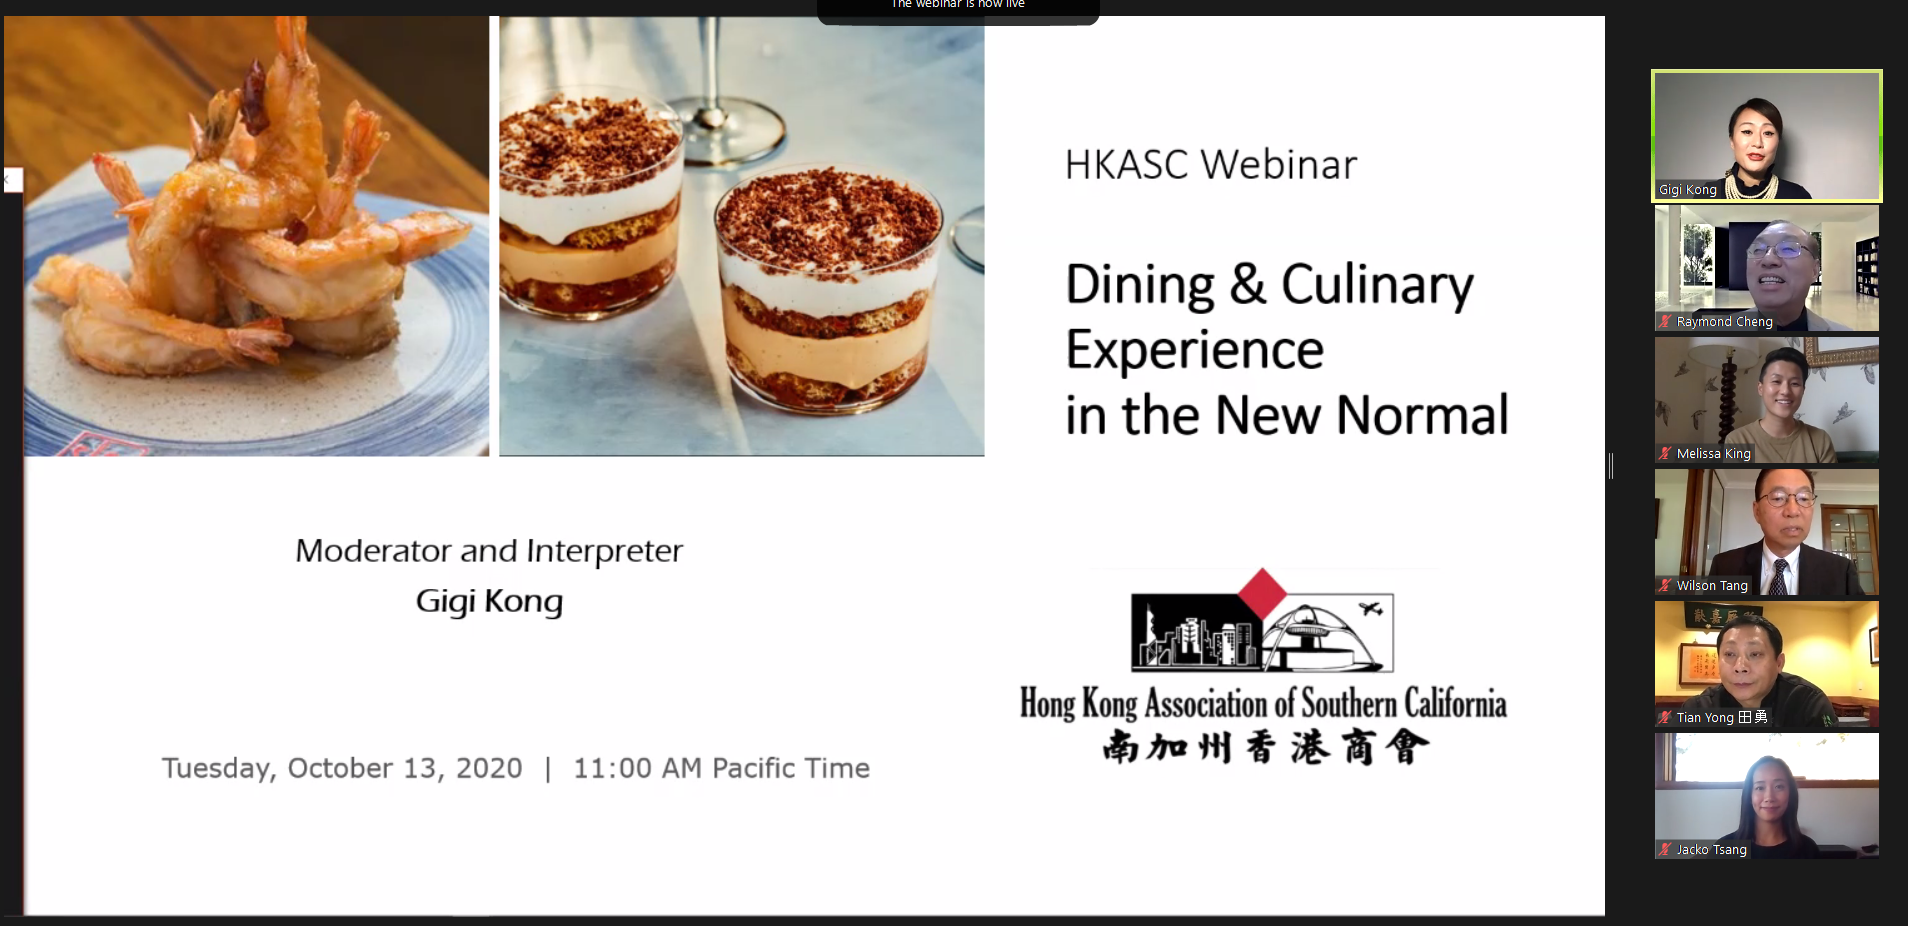 October 13, 2020 – HKASC Webinar: Dining & Culinary Experience in the New Normal